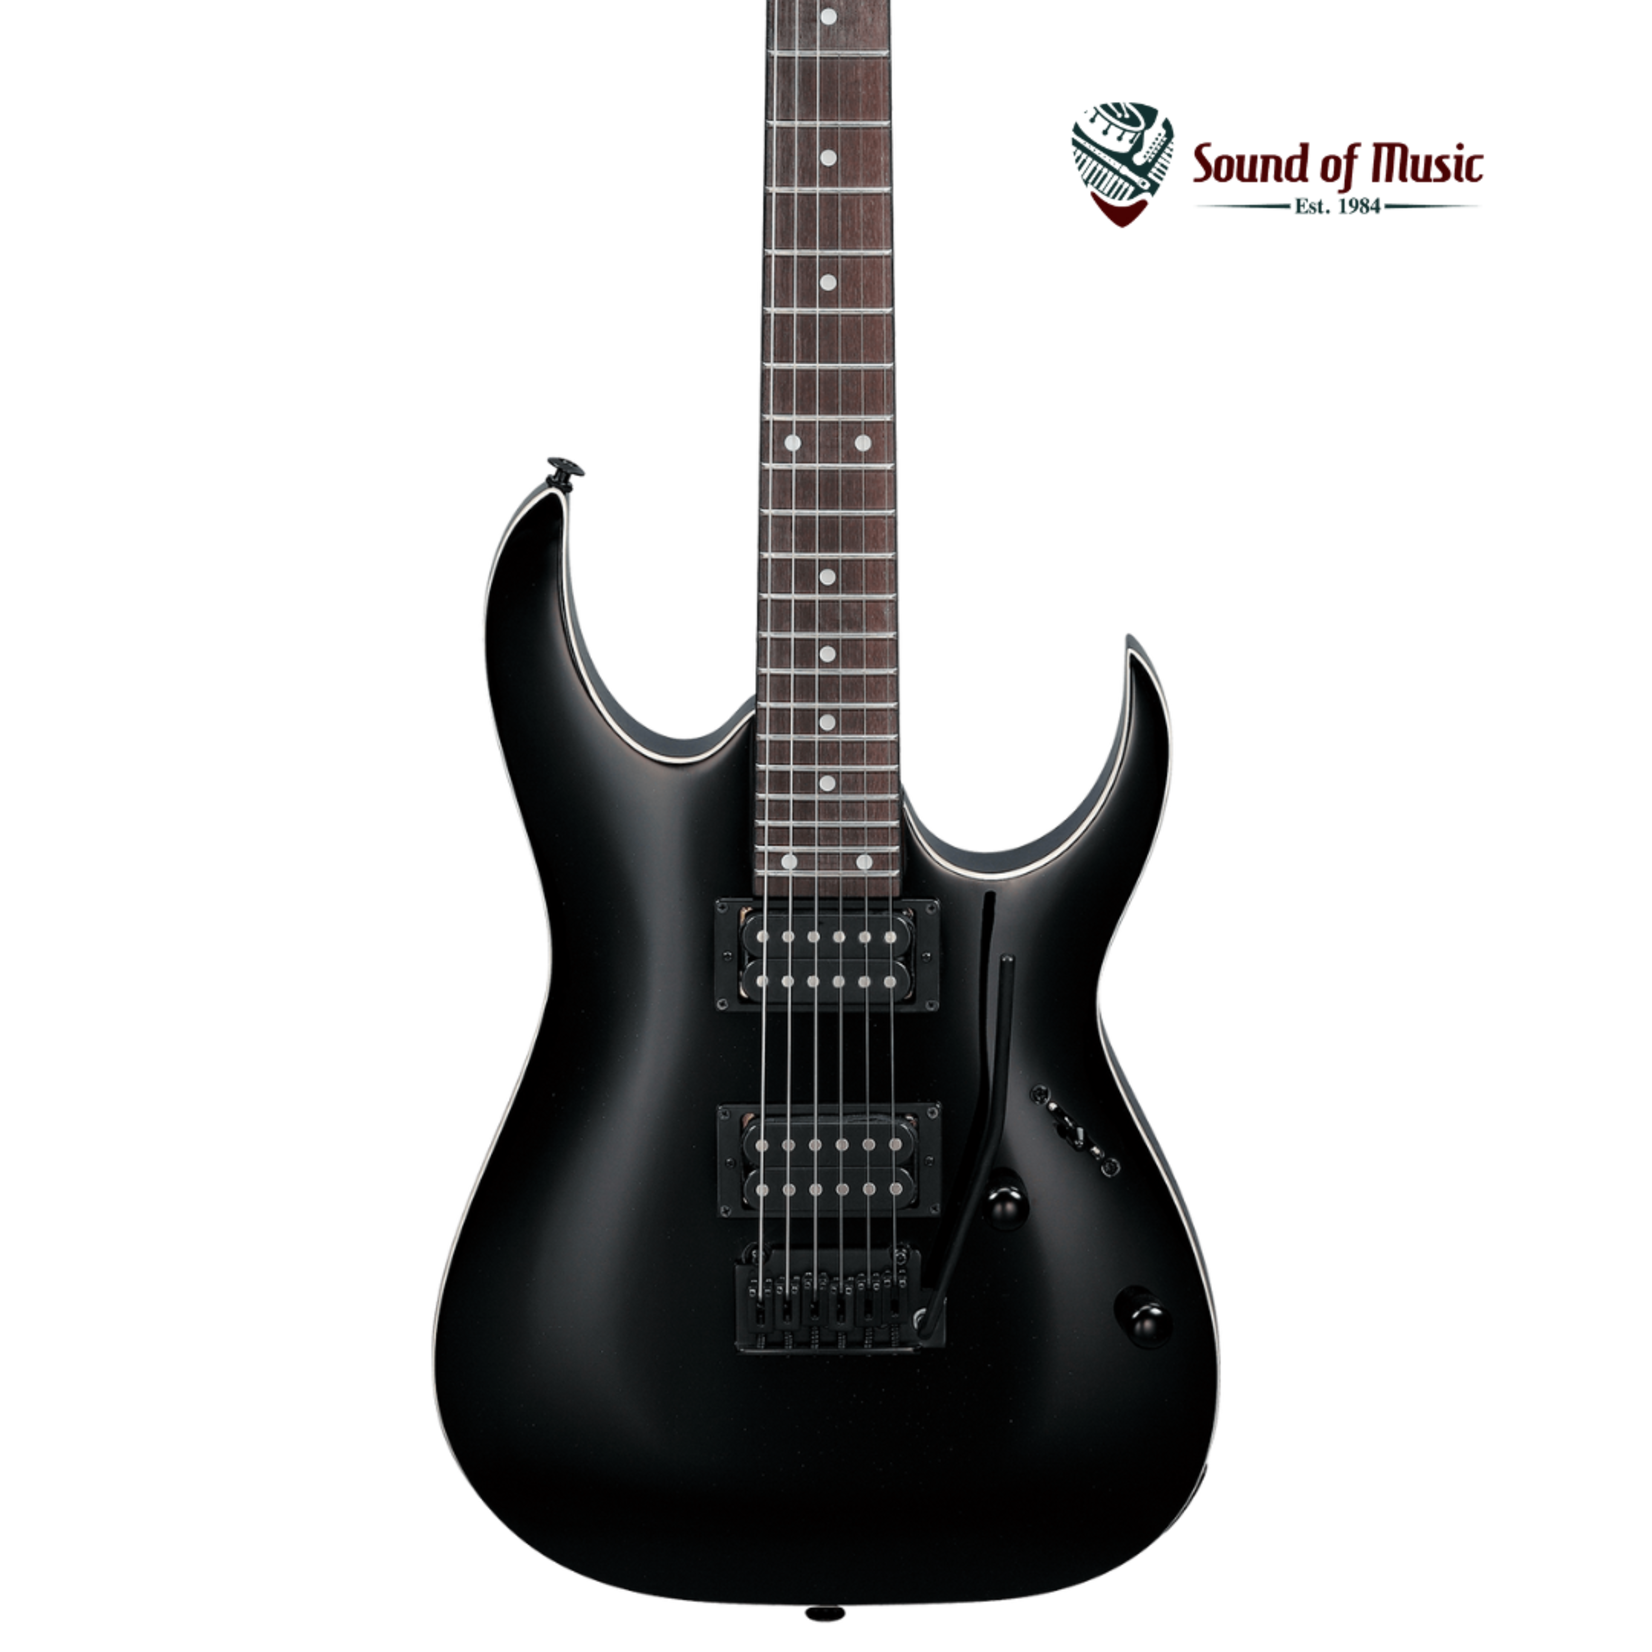 Ibanez GRGA120 GIO RGA Series Electric Guitar - Black Night - Package Deal With Amp, Bag, Cable, Strap, and Picks